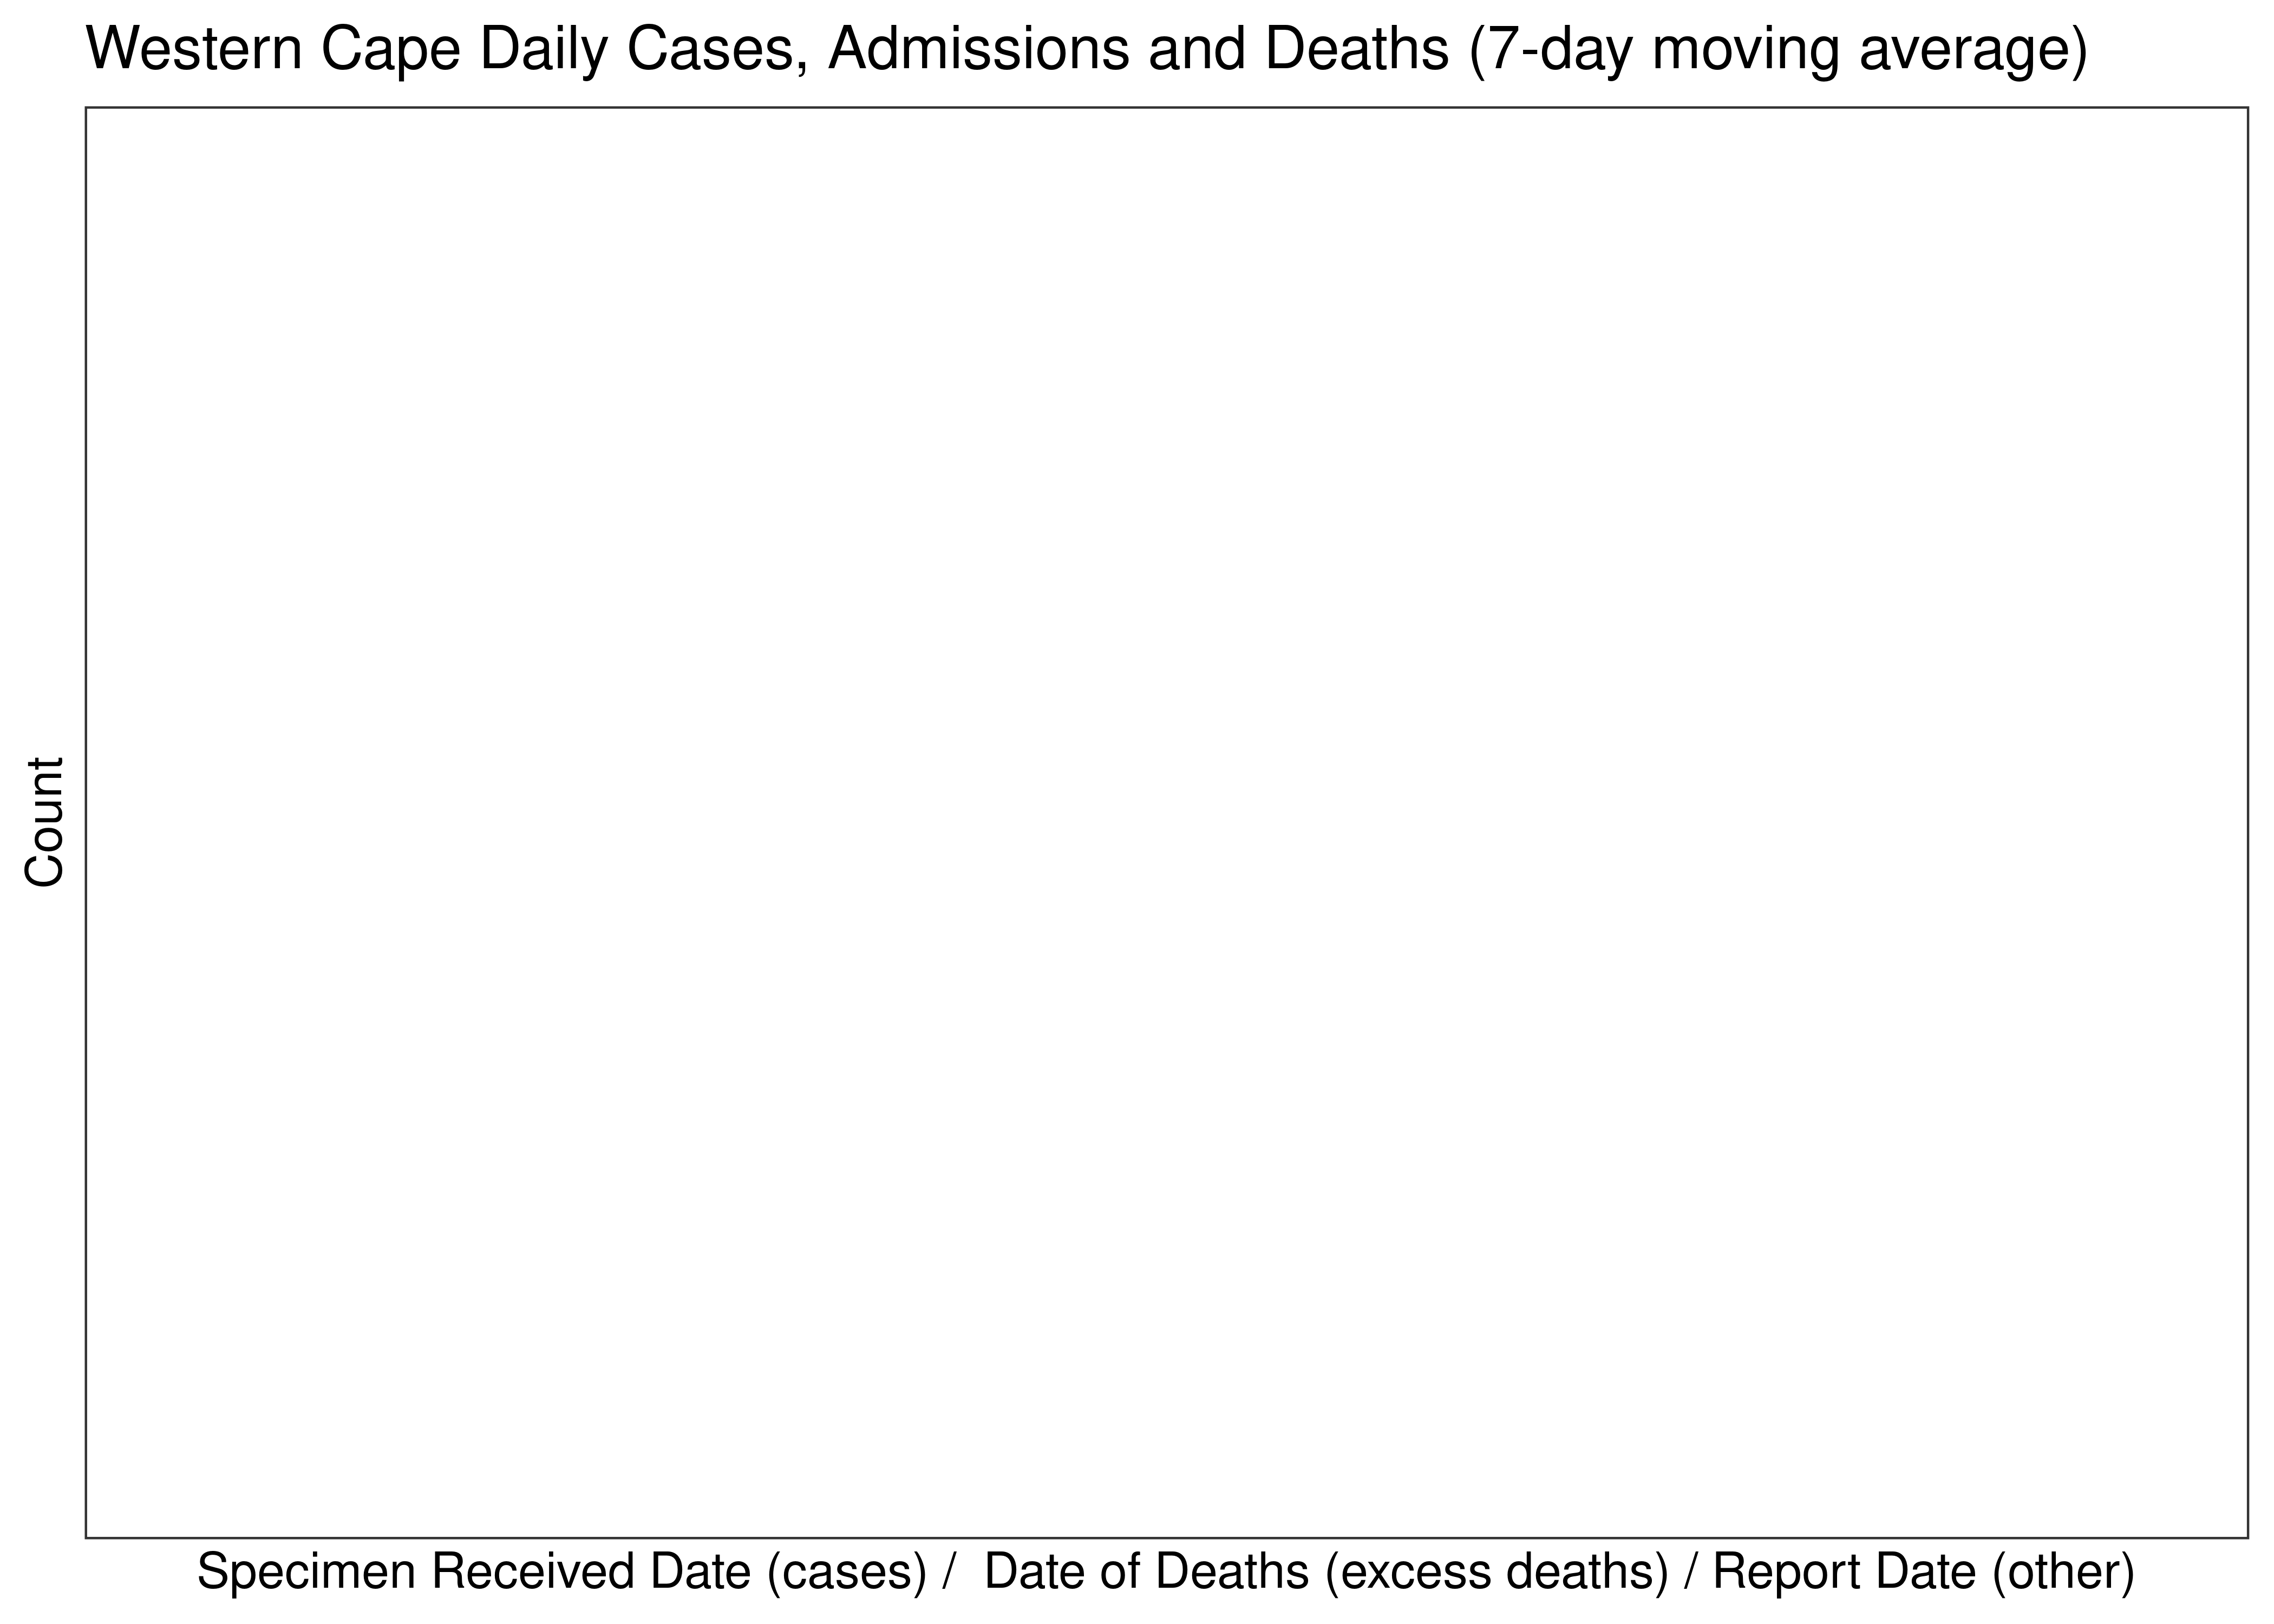 Western Cape Daily Cases, Admissions and Deaths for Last 30-days (7-day moving average)